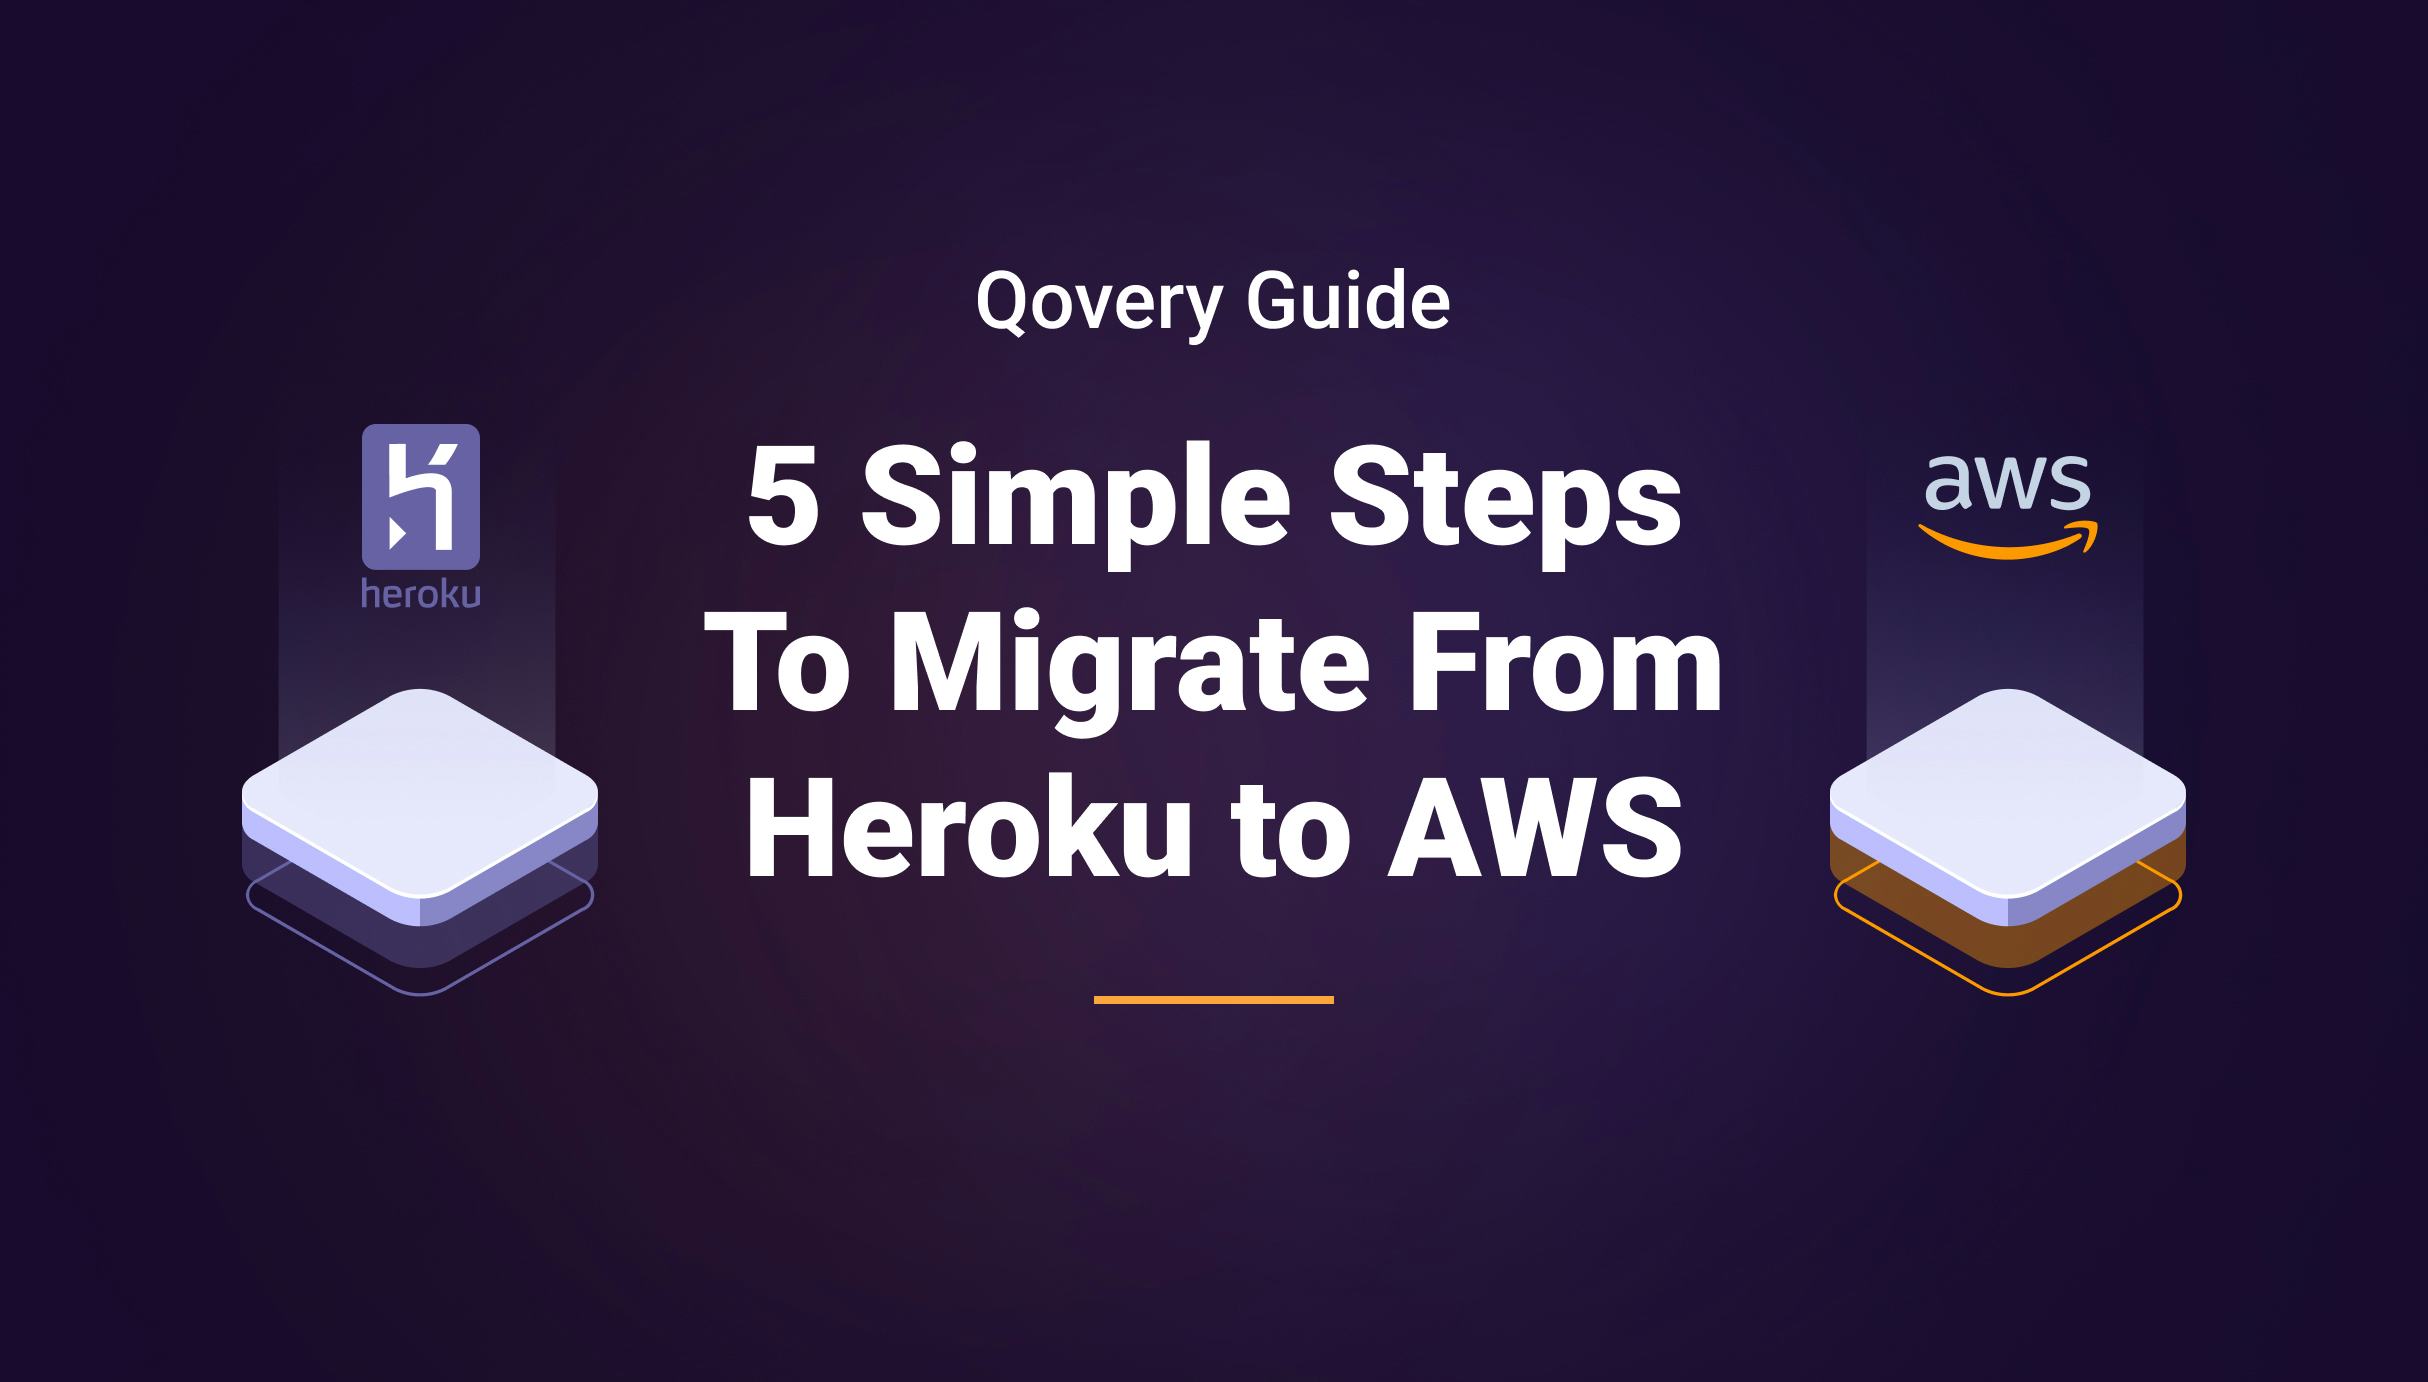 5 Simple Steps To Migrate From Heroku to AWS - Qovery